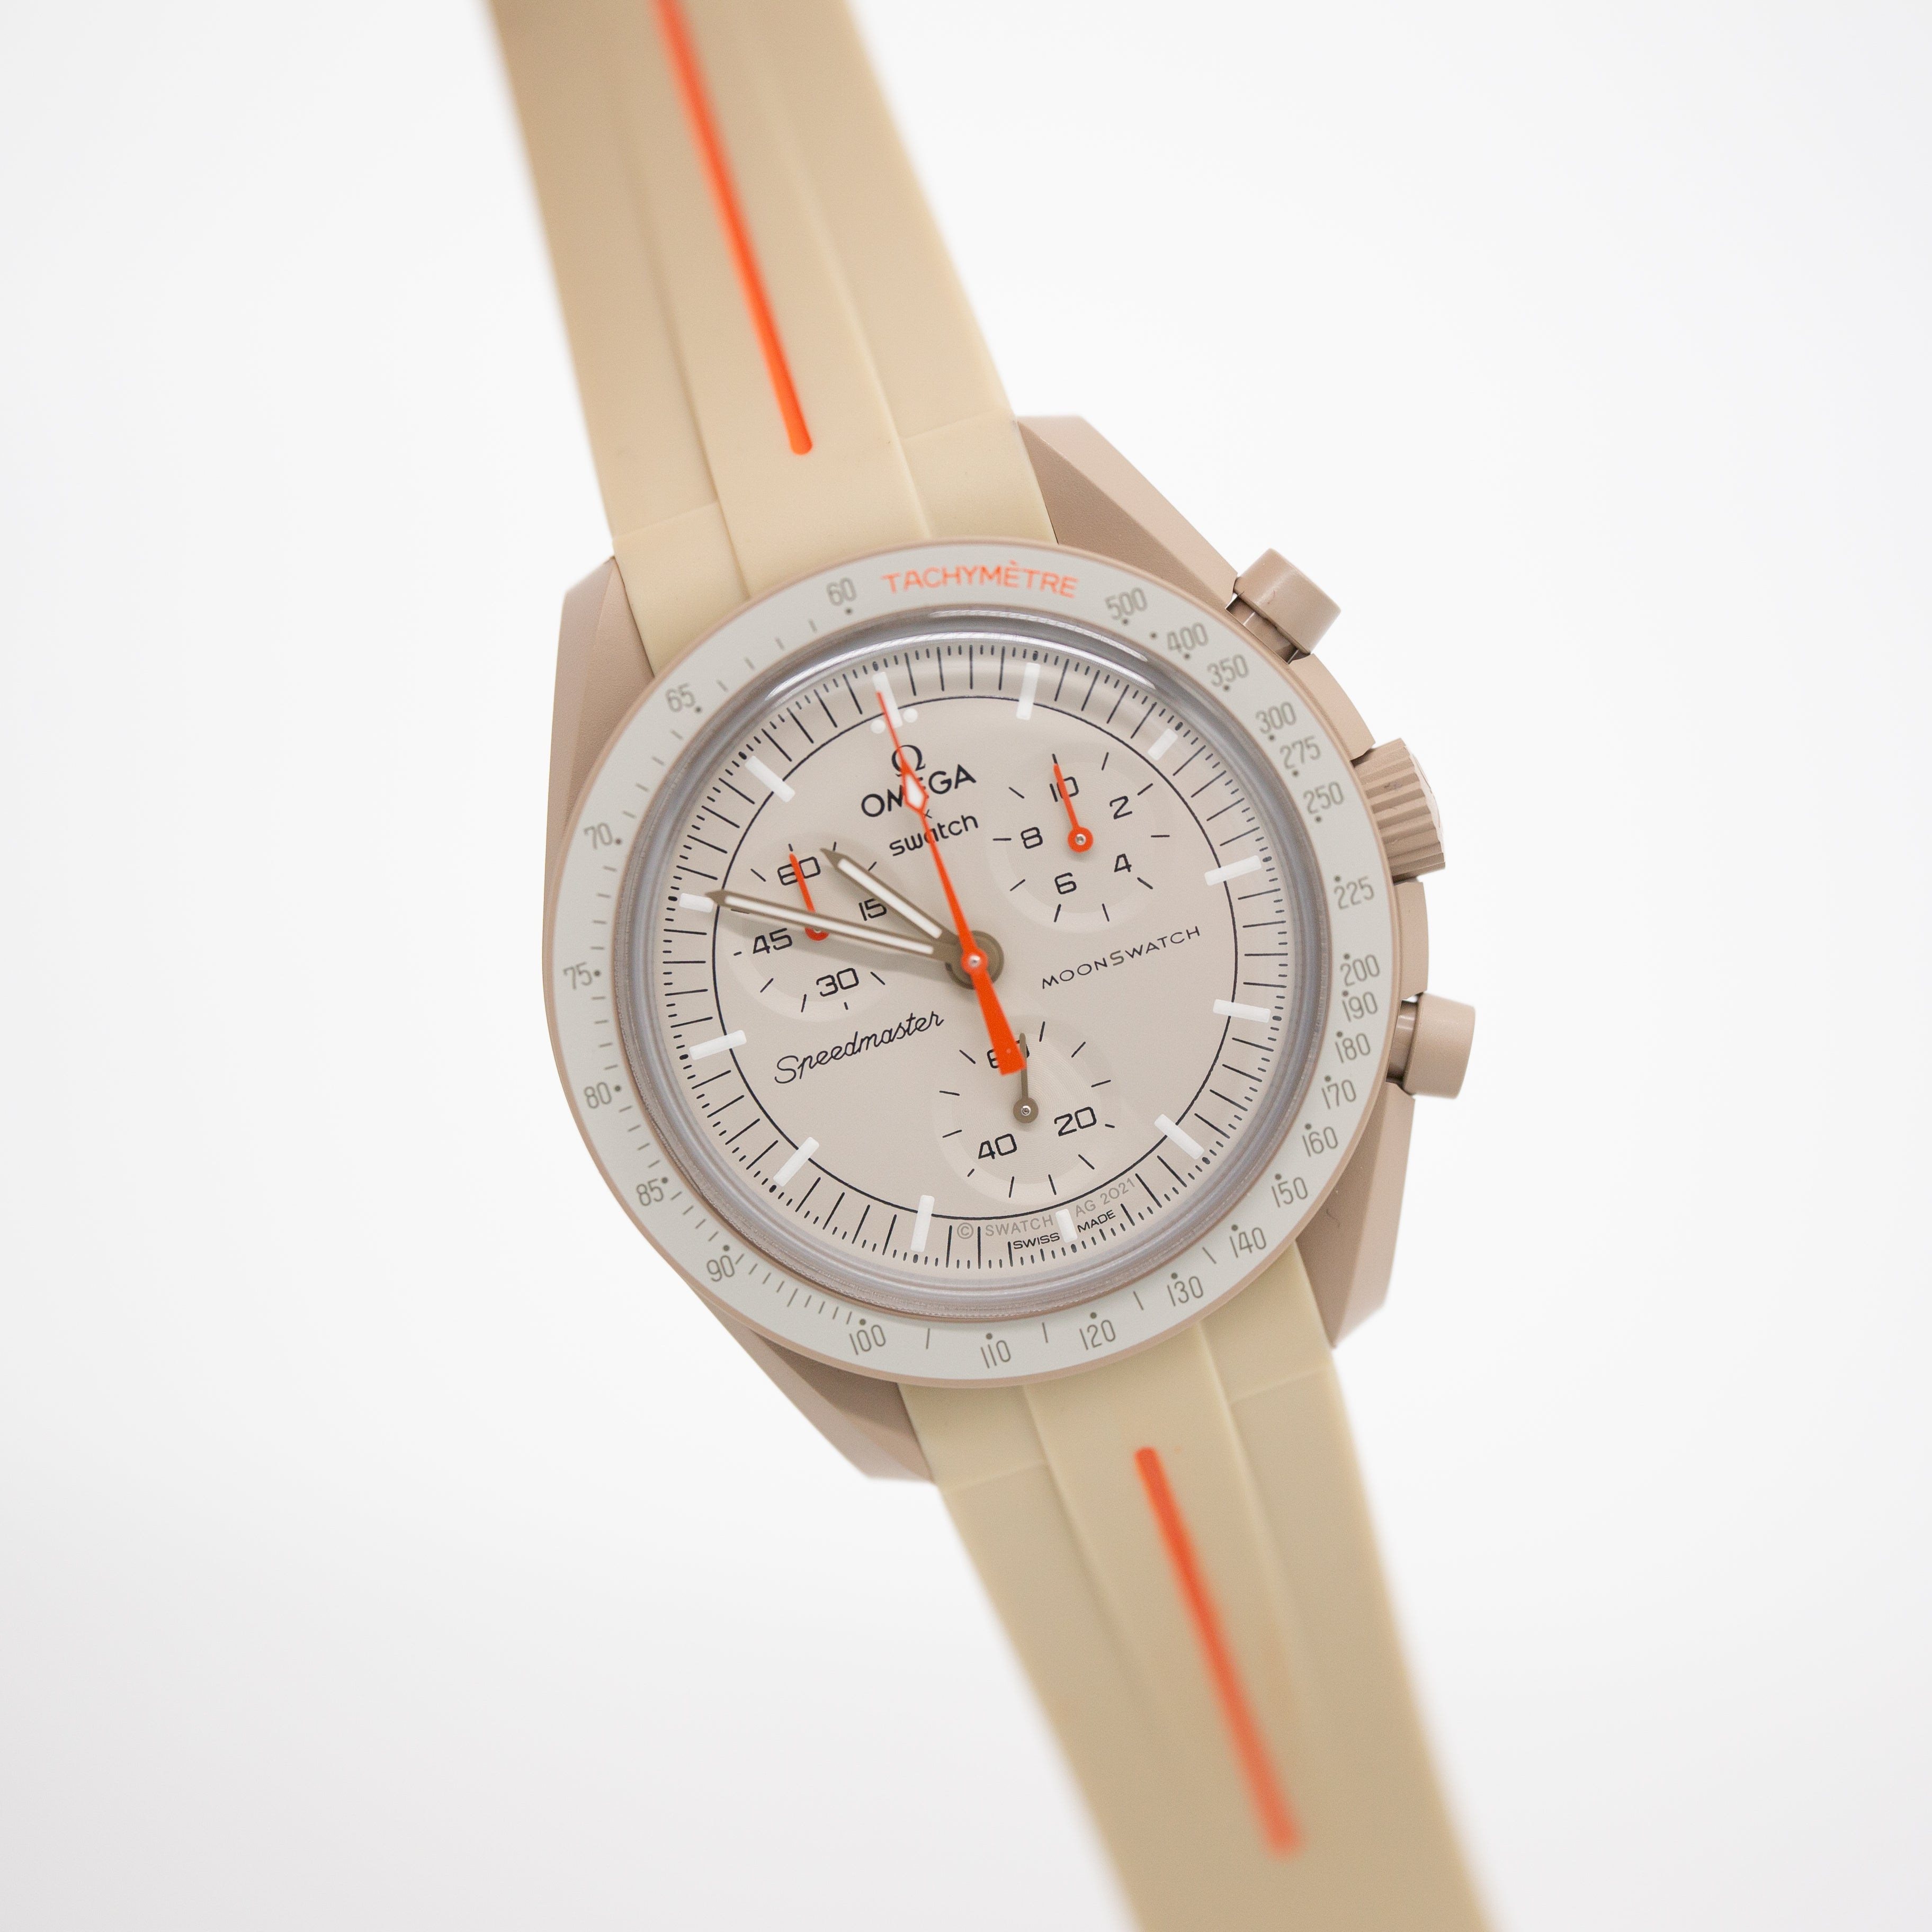 MoonSwatch Luxury Strap in Khaki with Orange Stripe for Mission to Jupiter